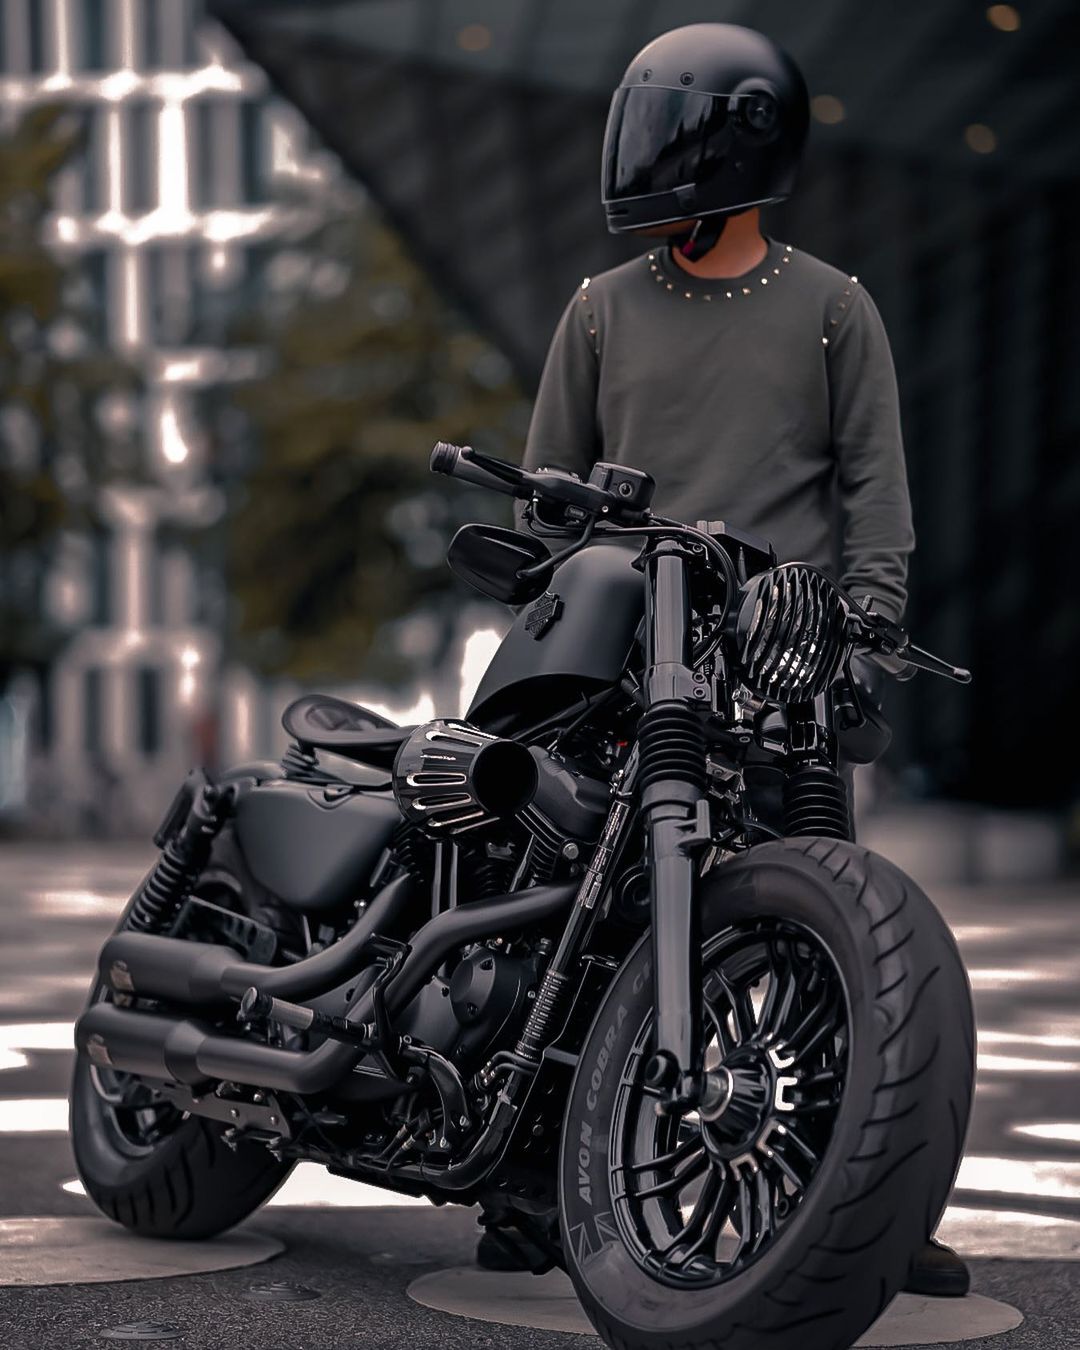 A view of the Halrery-Dvaidson motorcycle - a thing to be celebrated, with the brand initiating a Harley-Davidson Homecoming Challenge in commemoration of 120 years of service to the moto community